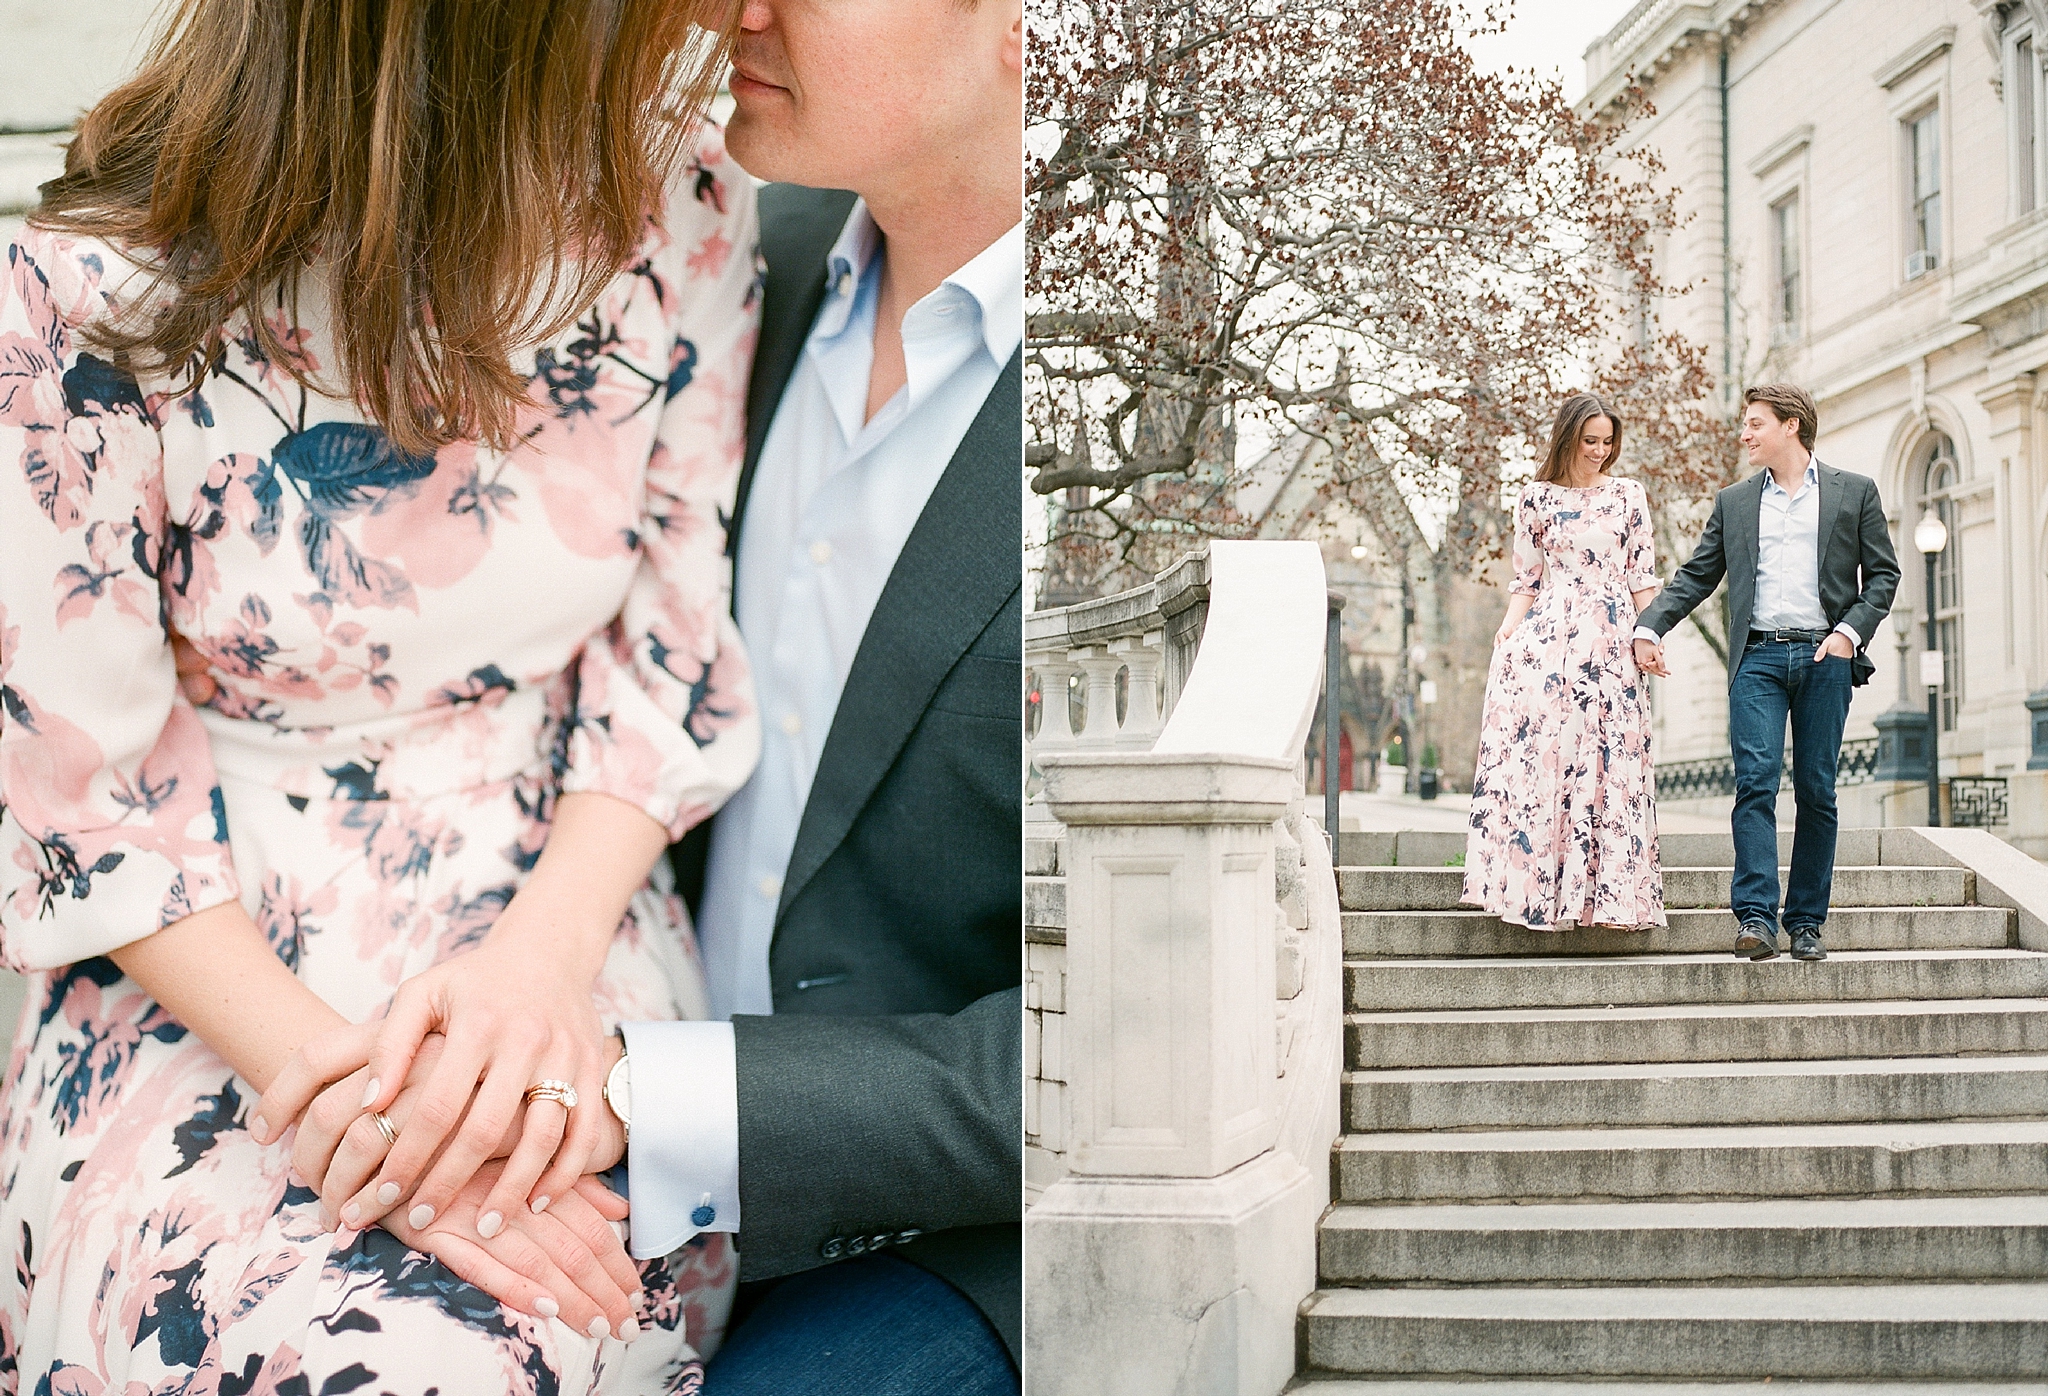 This stylish session is held throughout downtown Baltimore, MD and is photographed by Washington, DC anniversary photographer, Alicia Lacey.